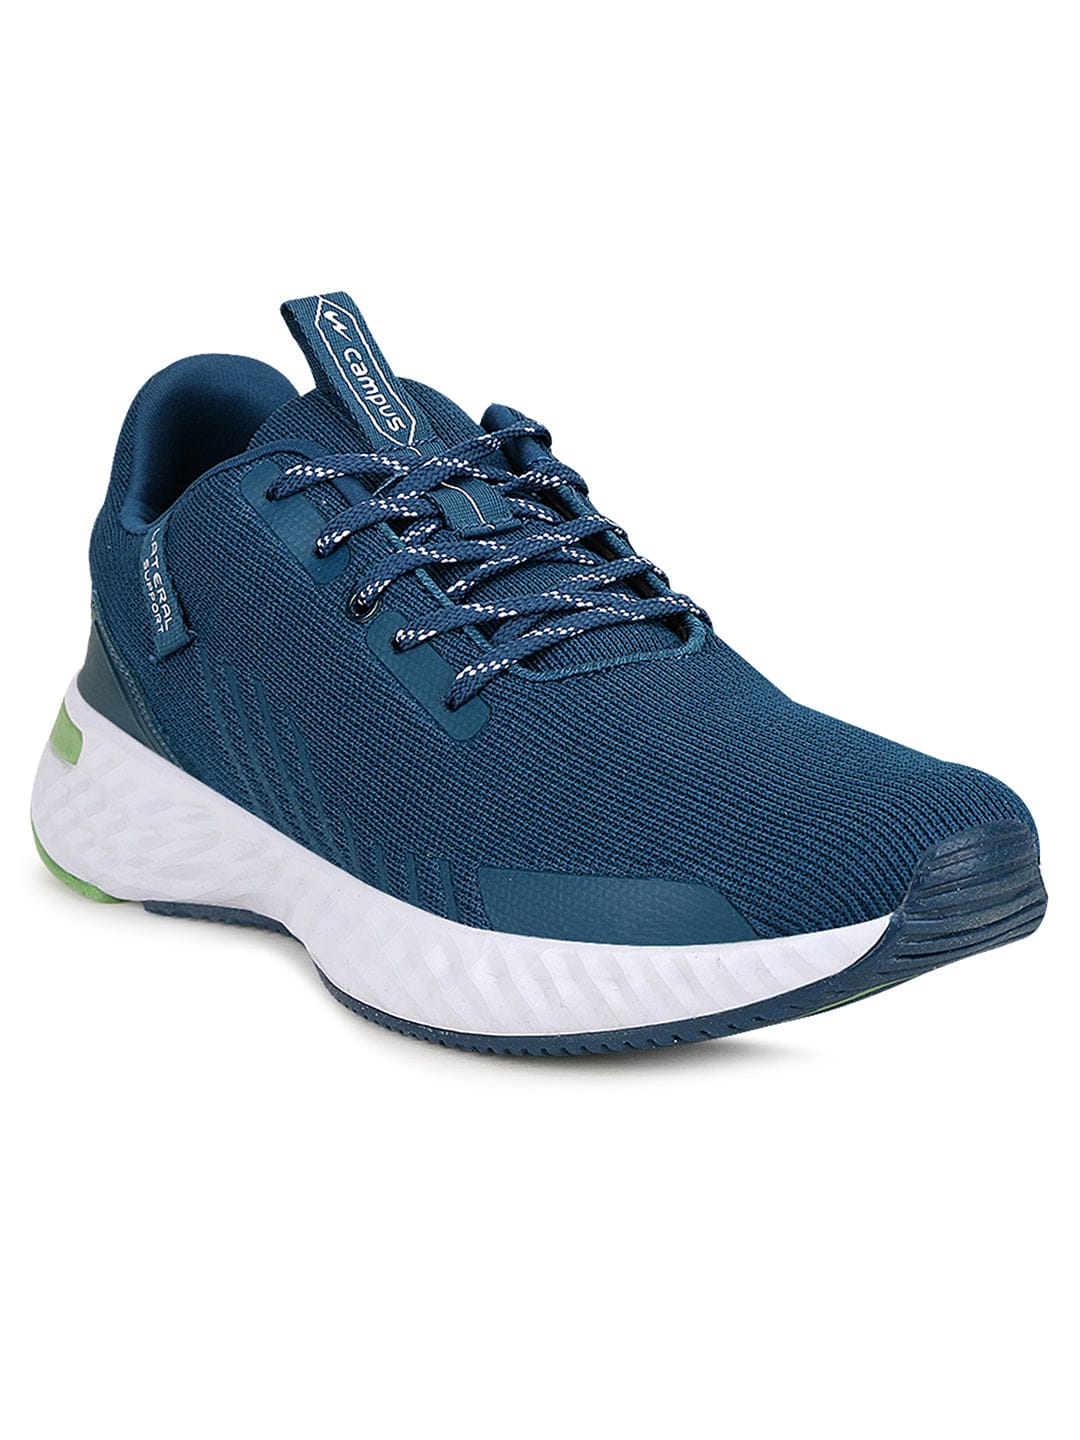 Buy SIMBA PRO Men's Running Shoes online | Campus Shoes